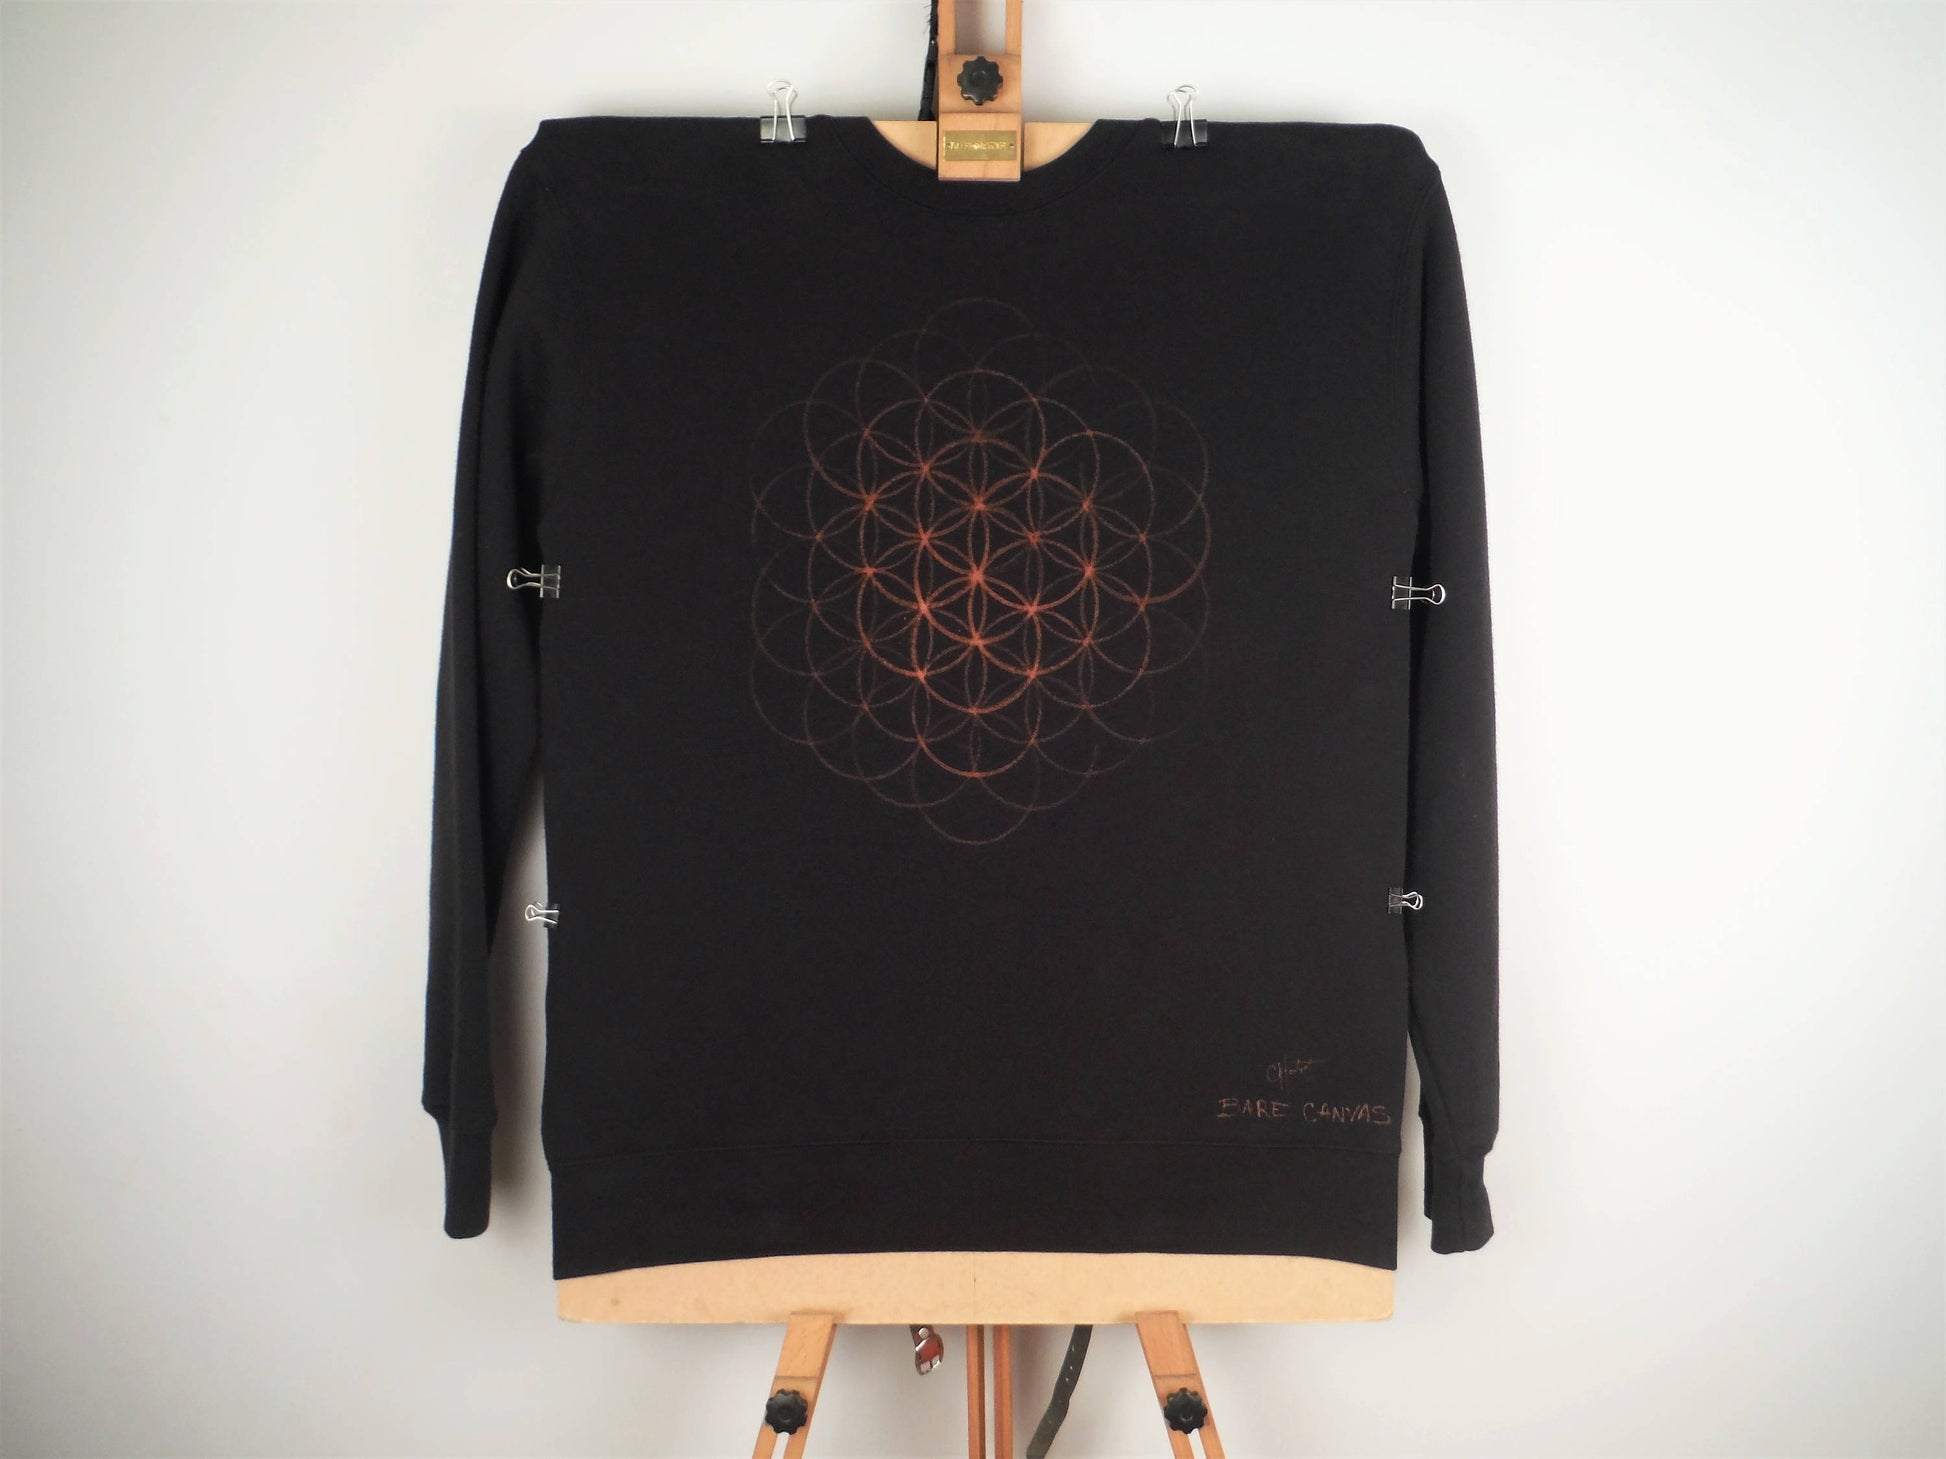 Flower of Life Hand Painted Bleach Sweatshirt - Black Small - Bare Canvas